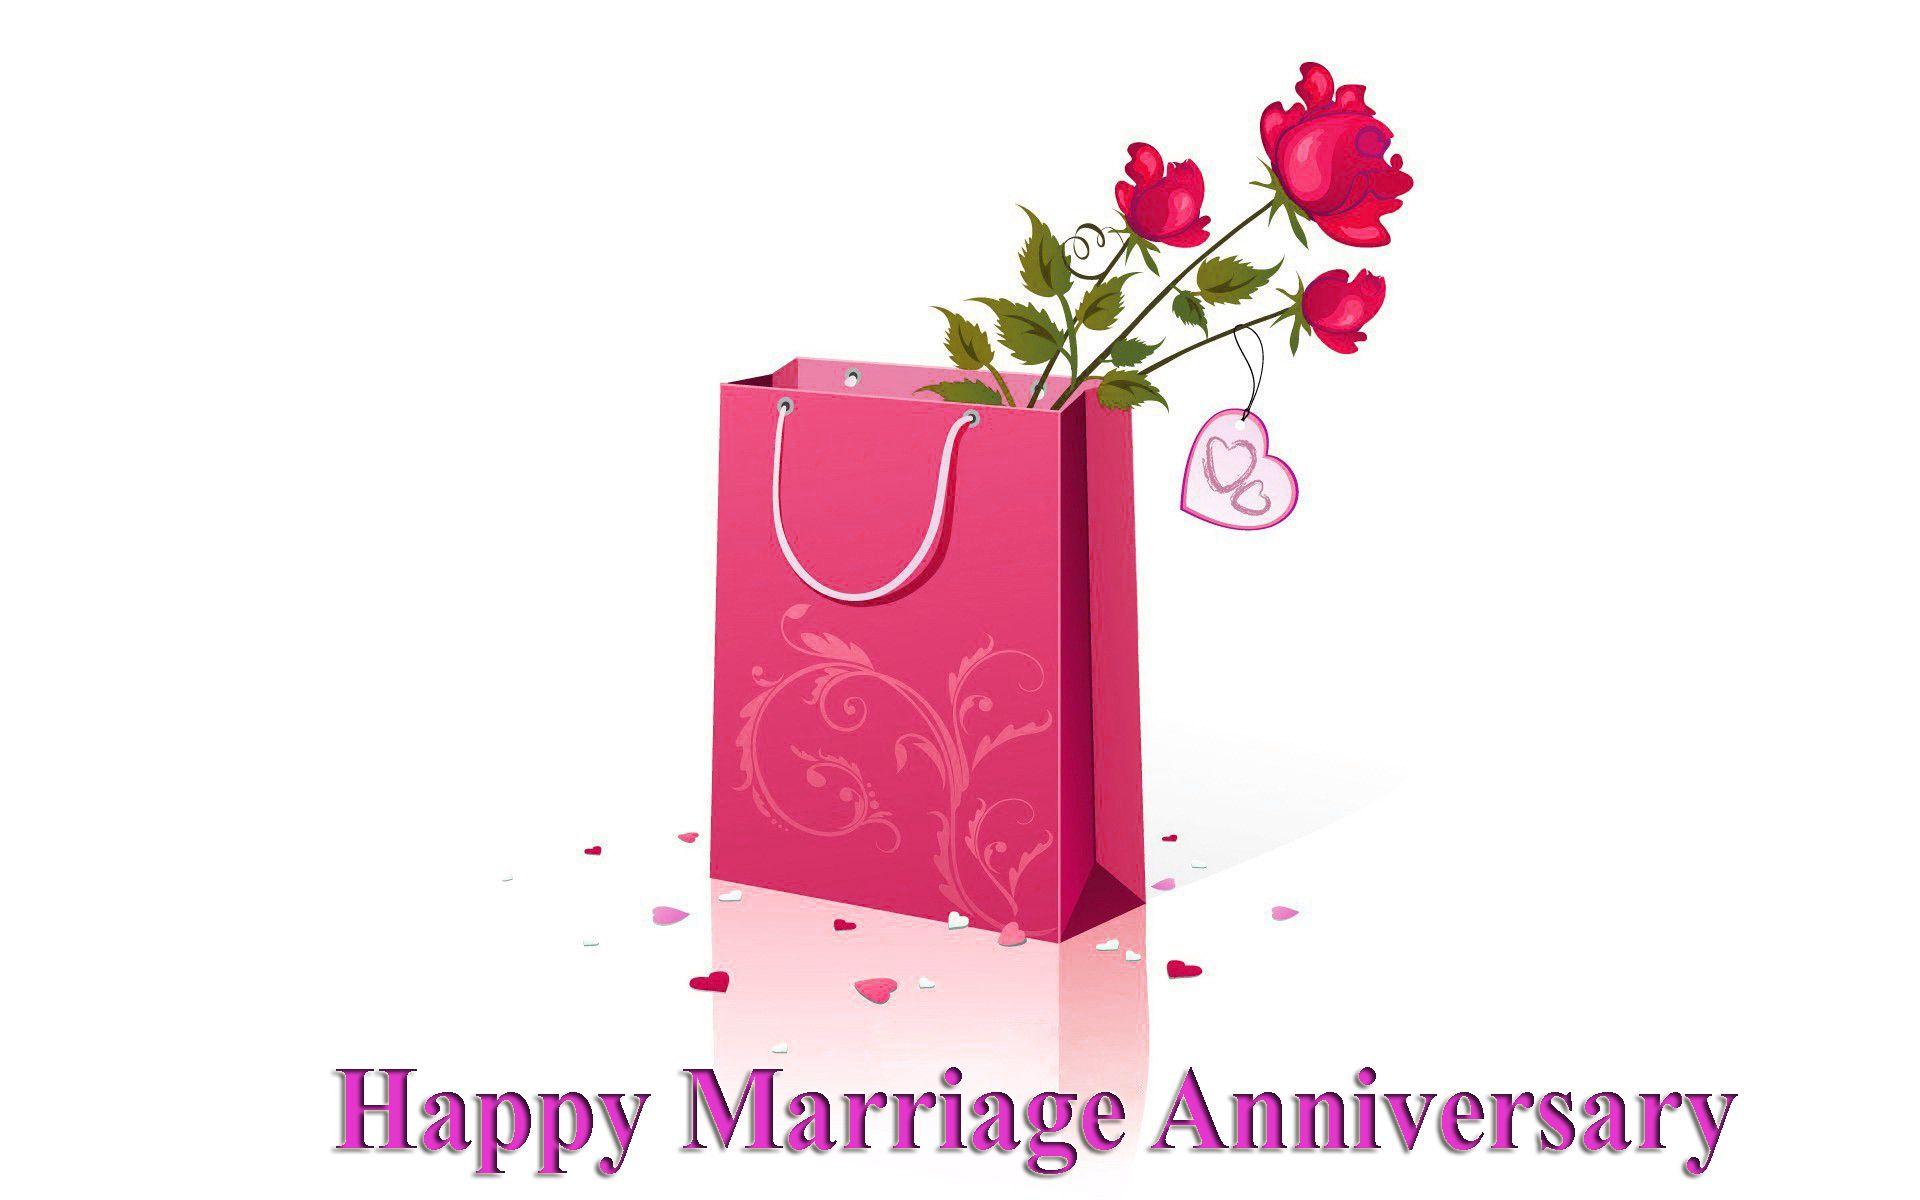 Best Happy Wedding Anniversary Wishes Image Cards Greetings Photo